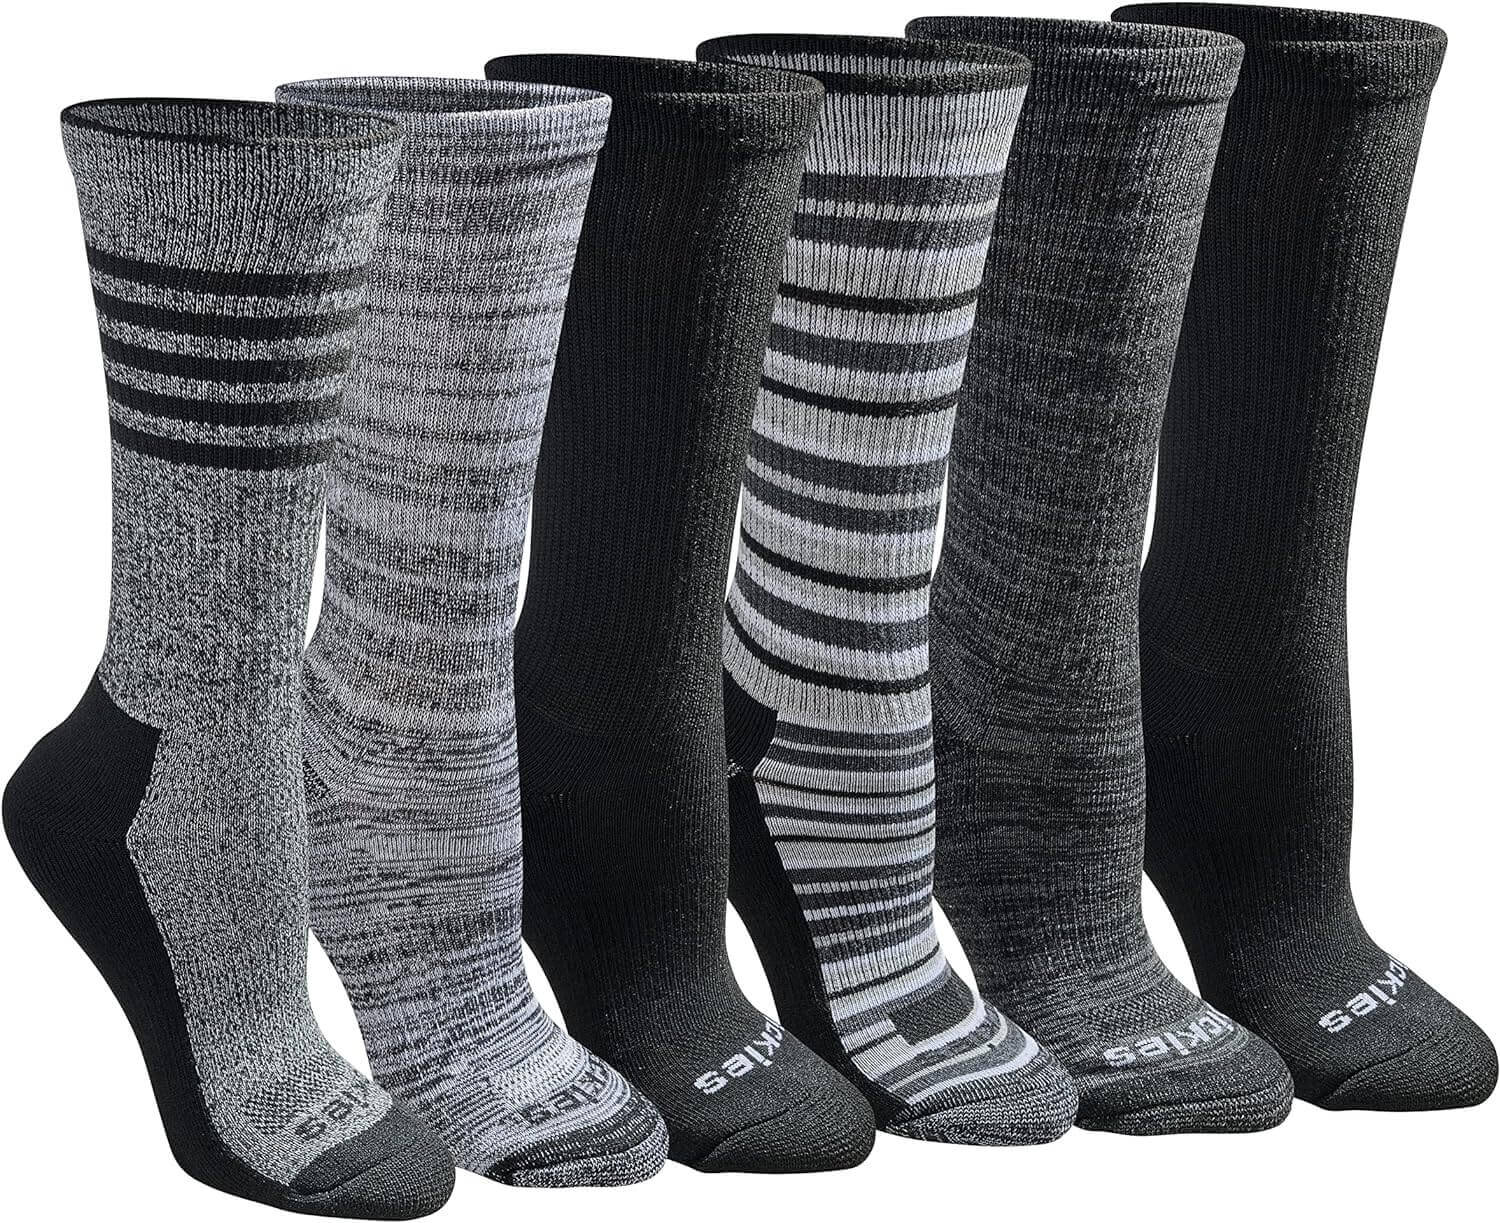 Shop The Latest >Women's Dri-tech Moisture Control Crew Socks Multipack > *Only $21.59*> From The Top Brand > *Dickiesl* > Shop Now and Get Free Shipping On Orders Over $45.00 >*Shop Earth Foot*